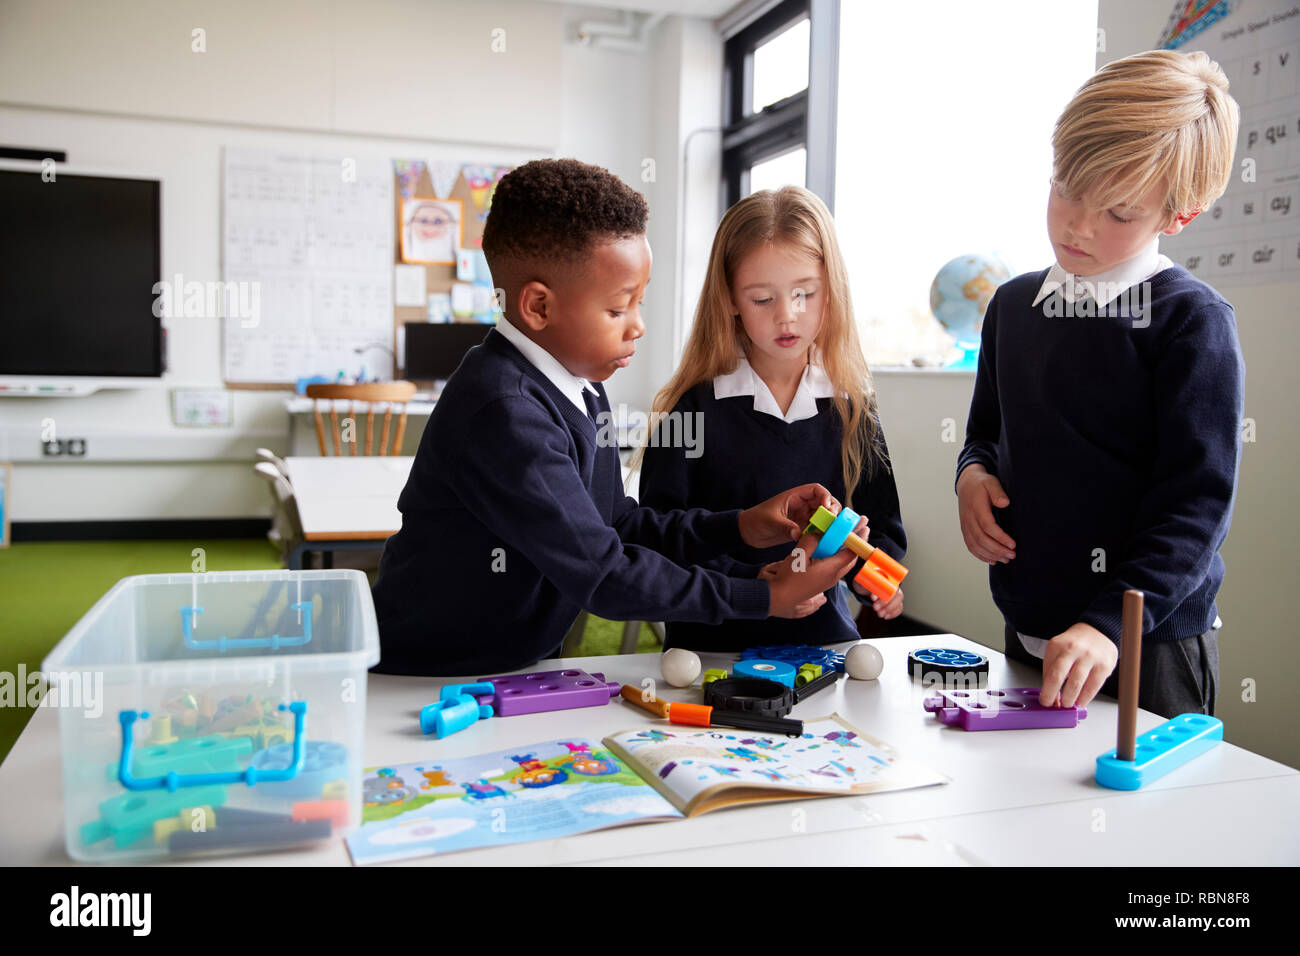 A girl and two boys standing at a table in a primary school classroom working together with toy construction blocks, close up Stock Photo